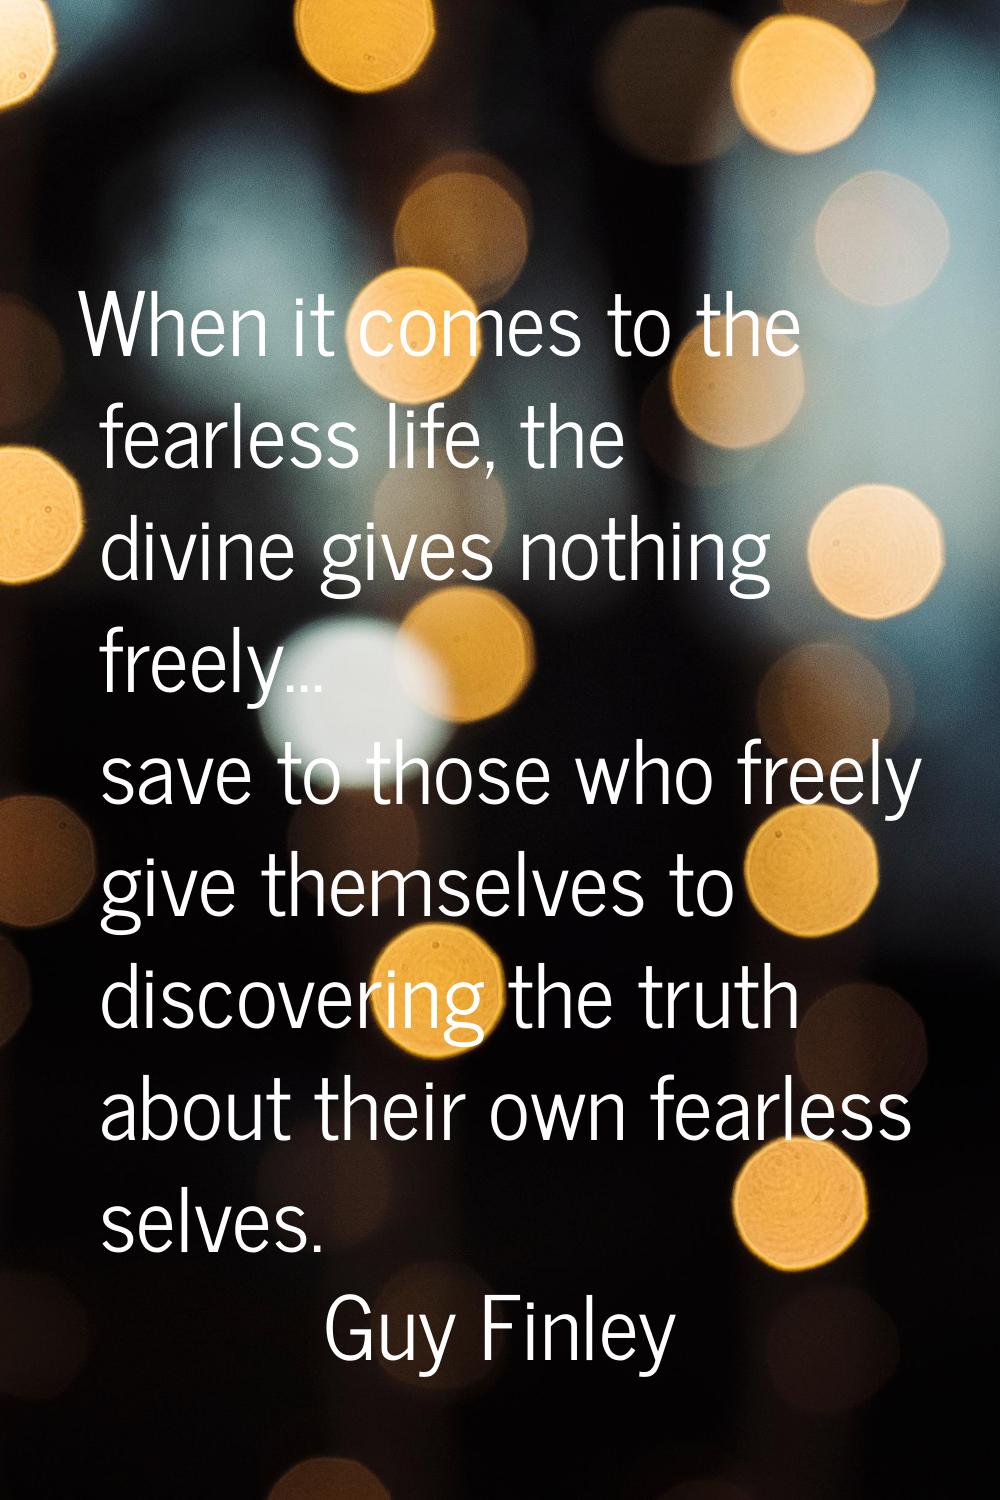 When it comes to the fearless life, the divine gives nothing freely... save to those who freely giv